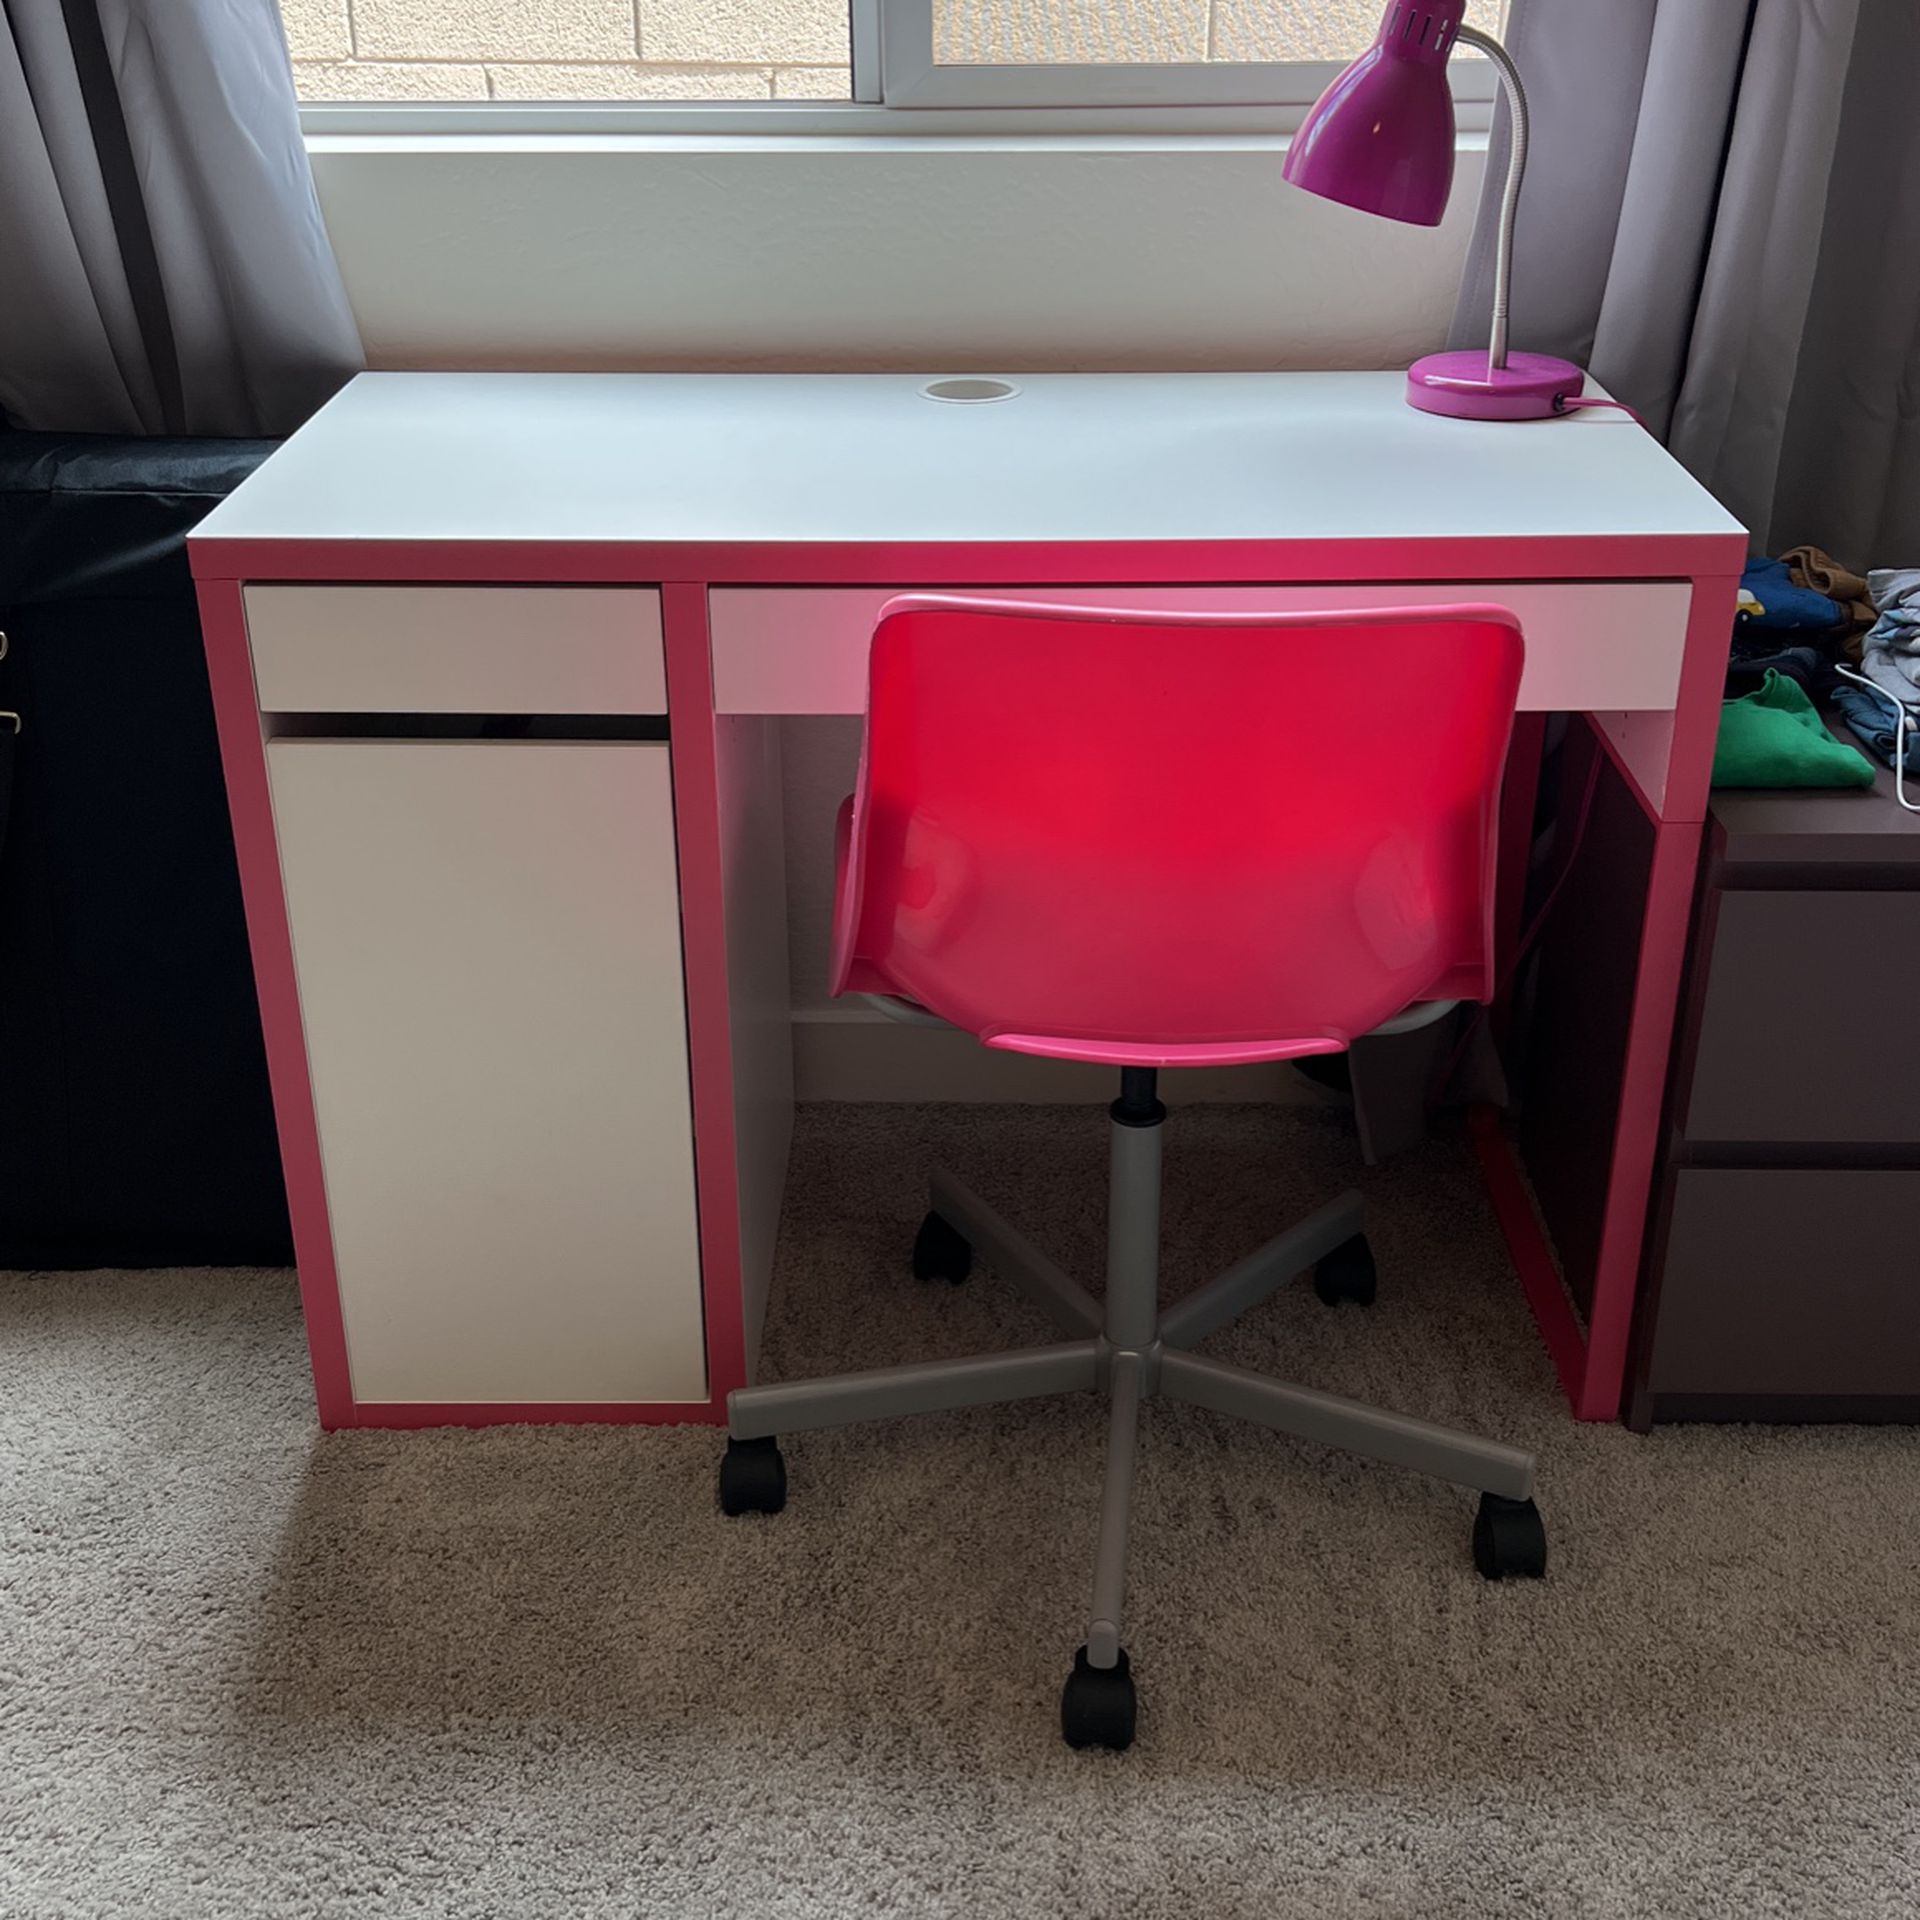 white/pink desk and pink chair